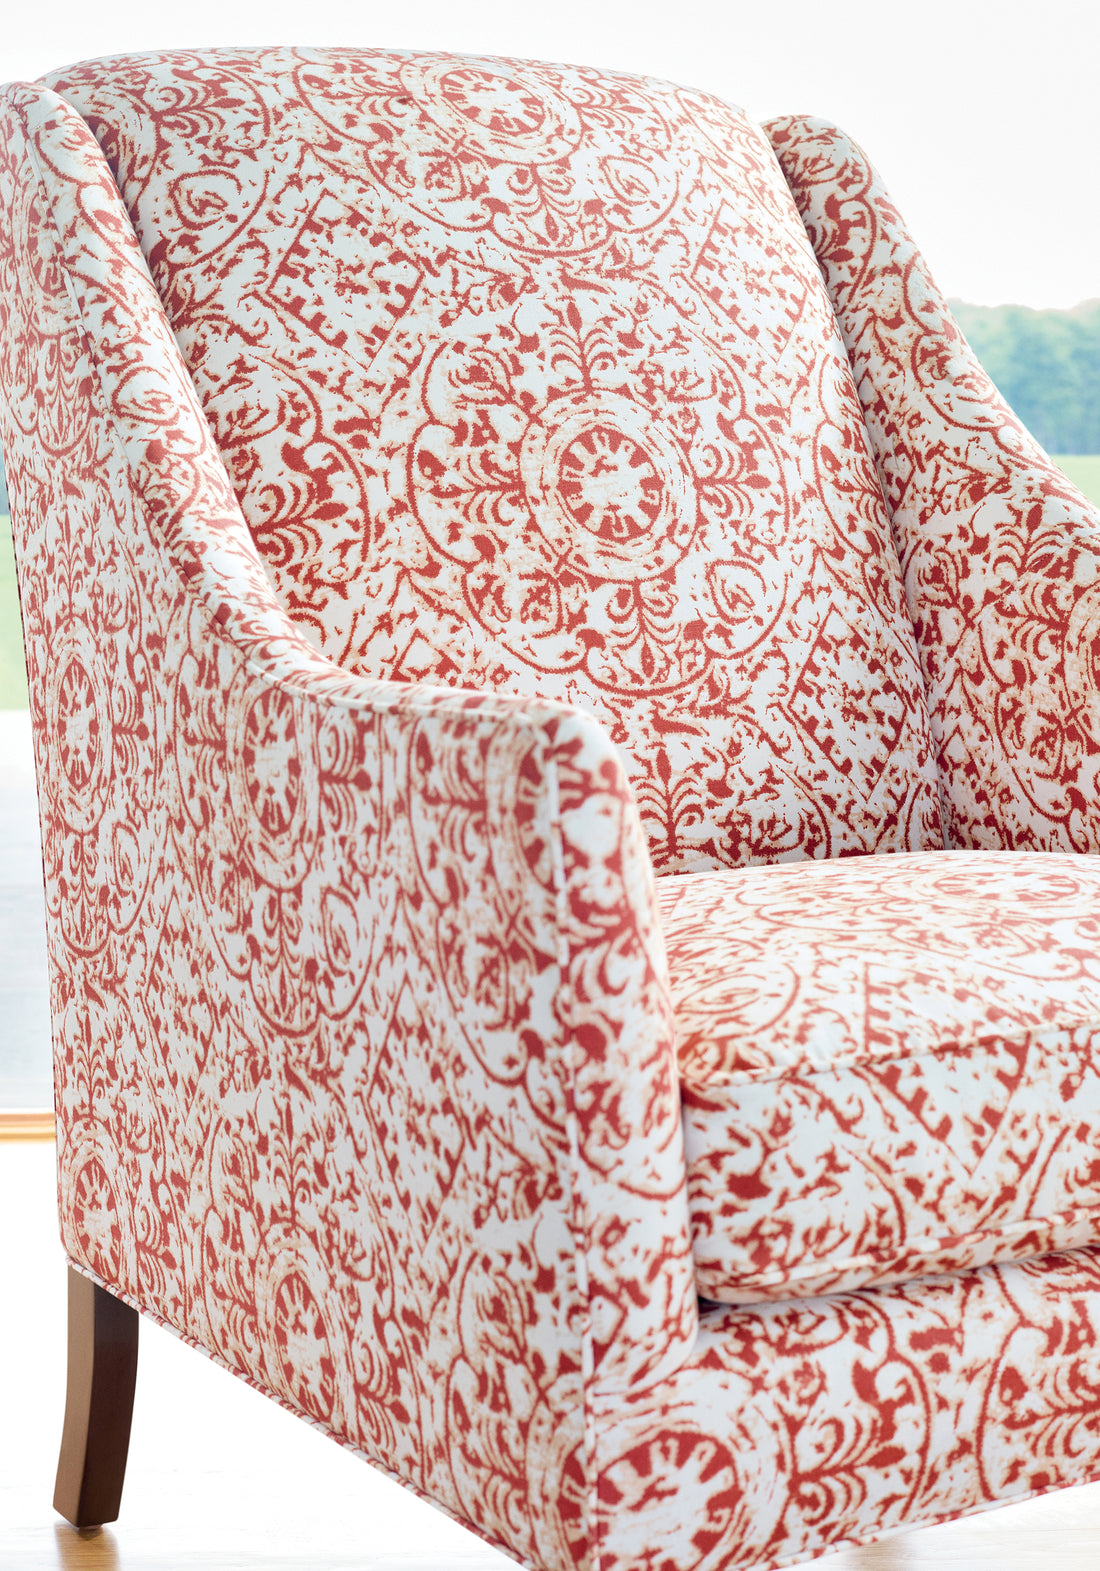 Chair upholstered in Havana fabric in sunbaked color - pattern number F981314 - by Thibaut fabric